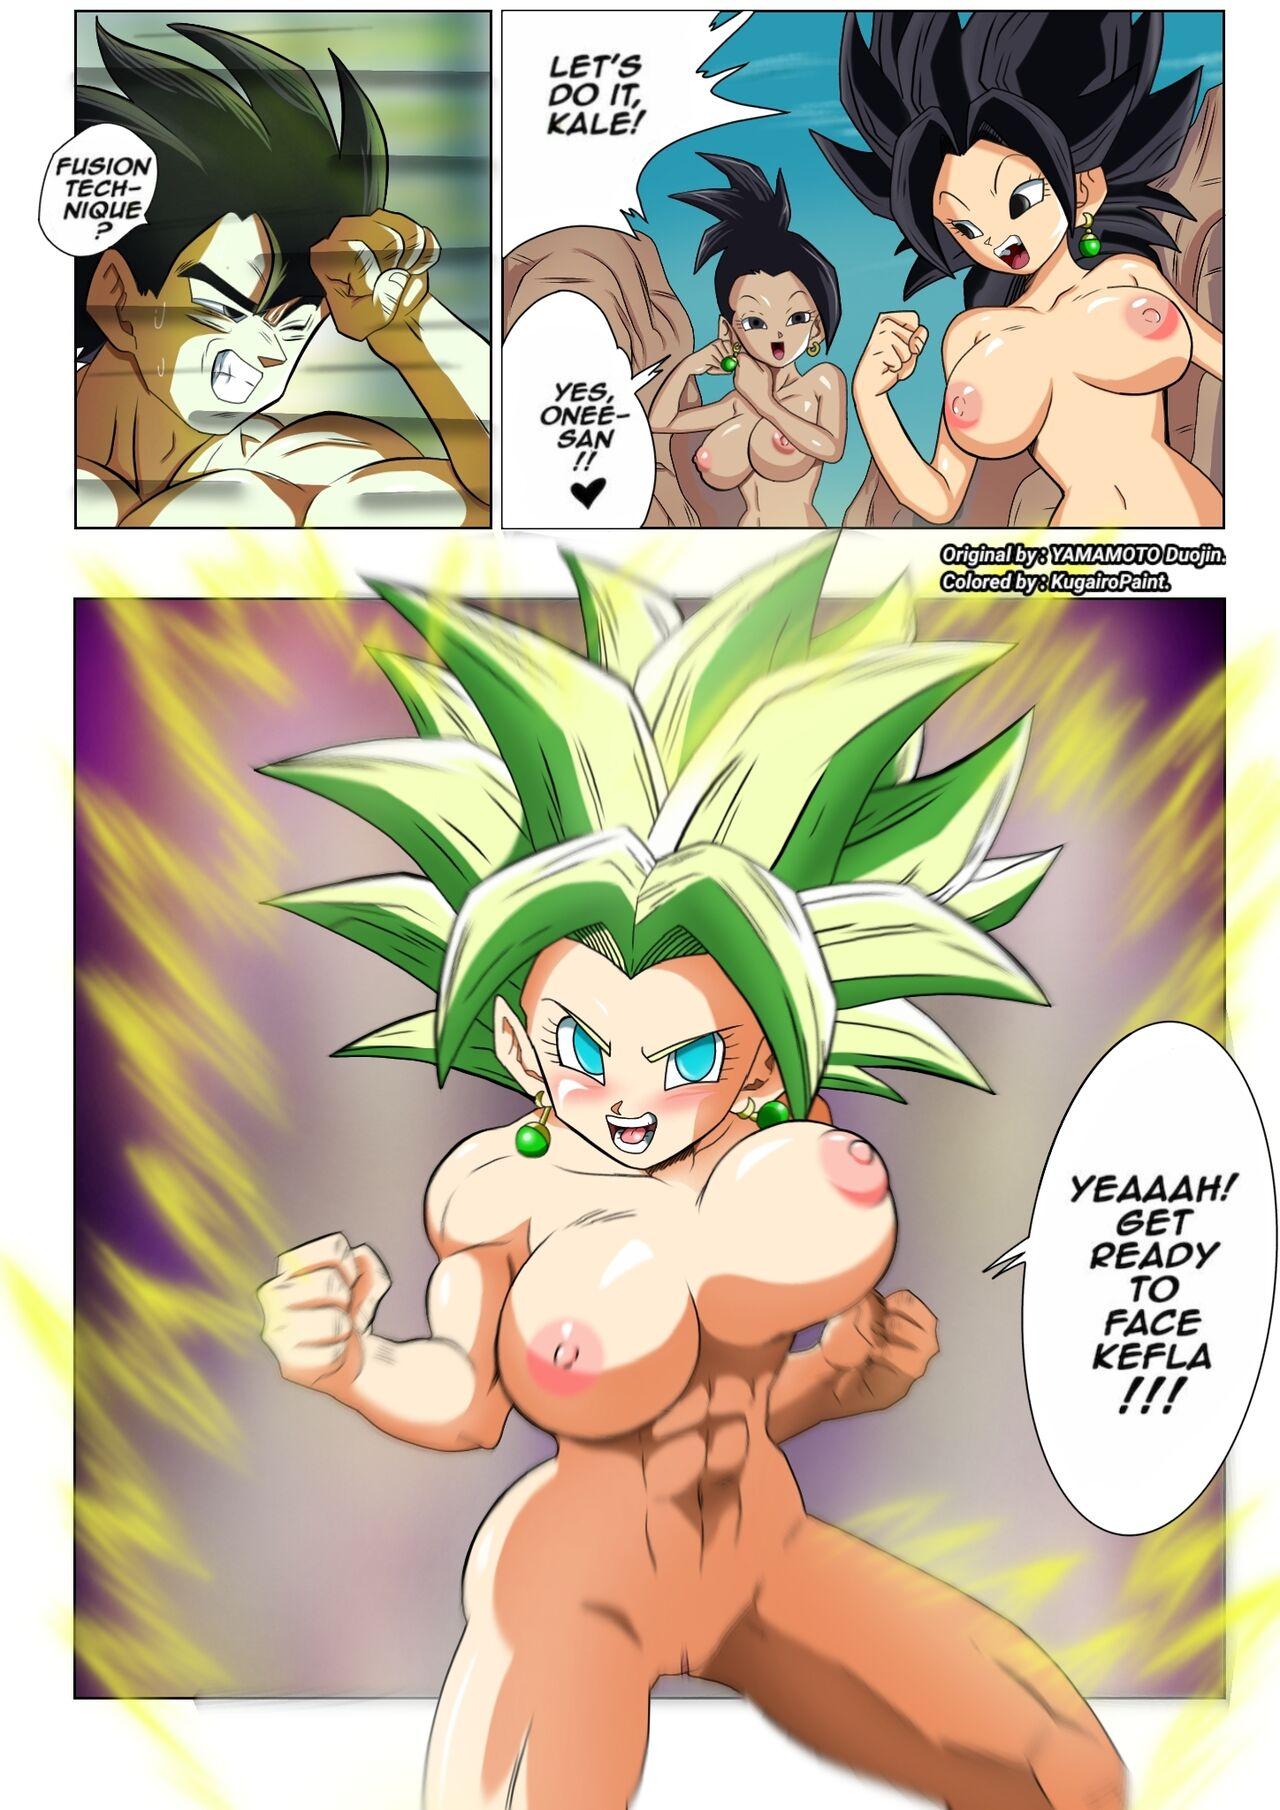 Buttfucking Fight in the 6th Universe!! - Dragon ball super Matures - Page 9